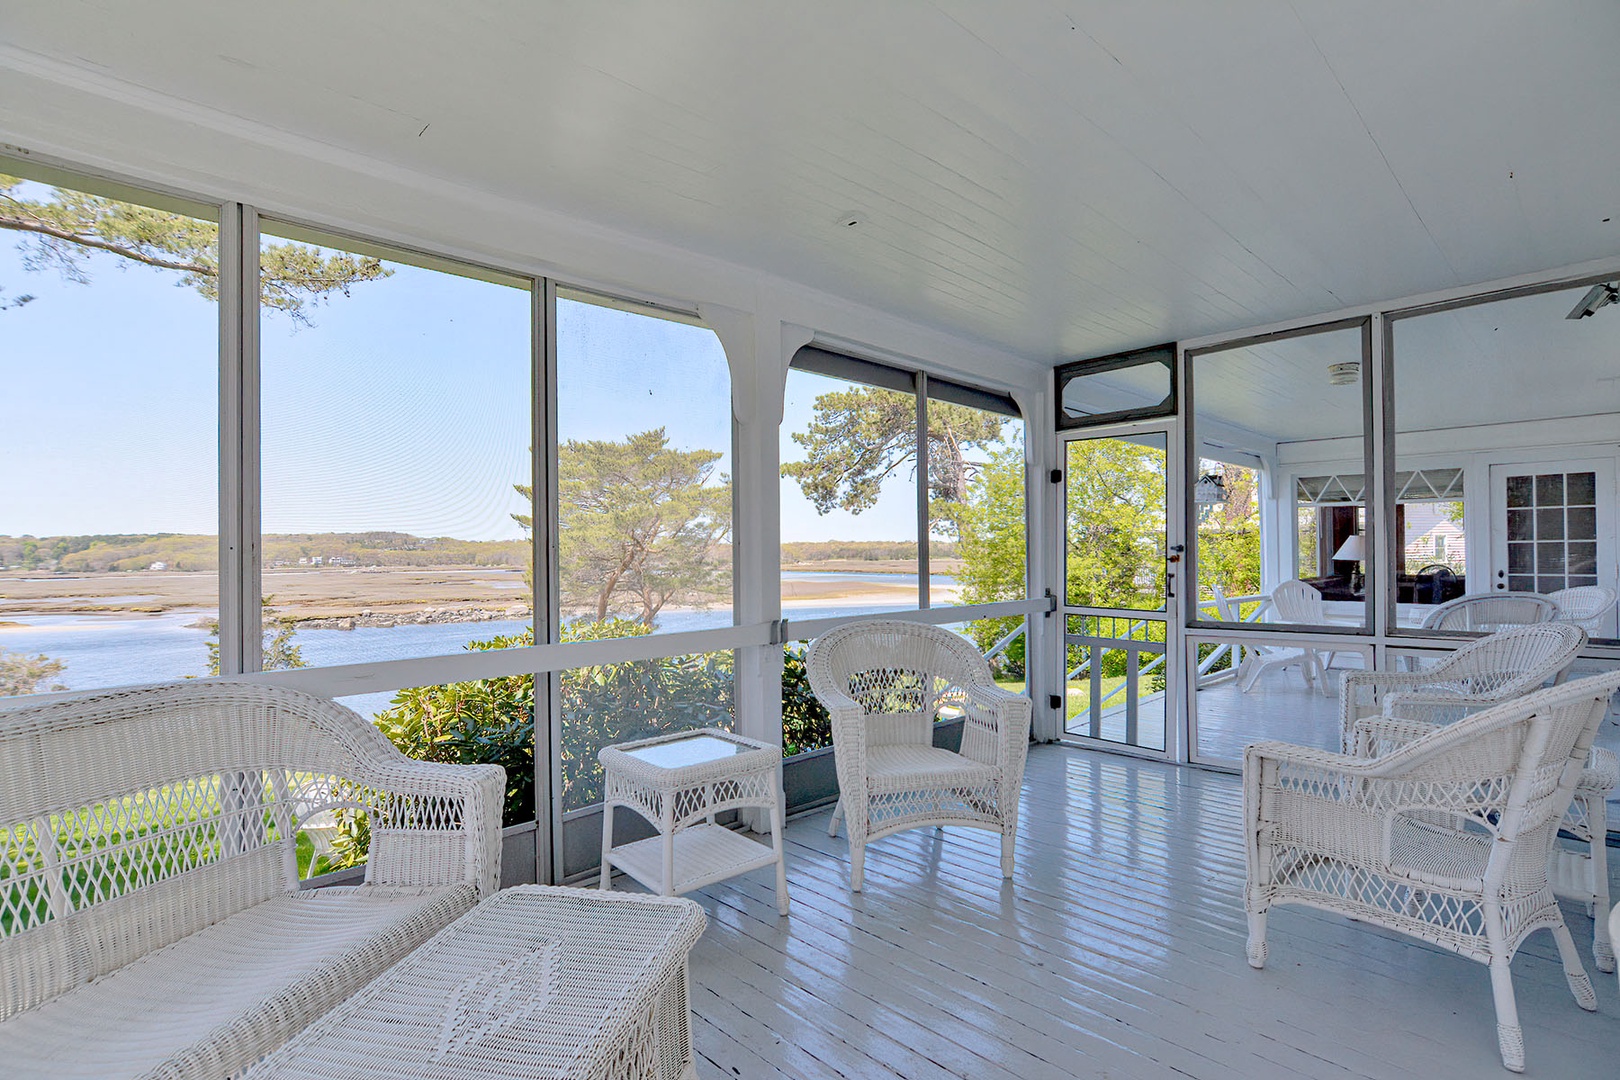 The large wraparound porch offers river views.